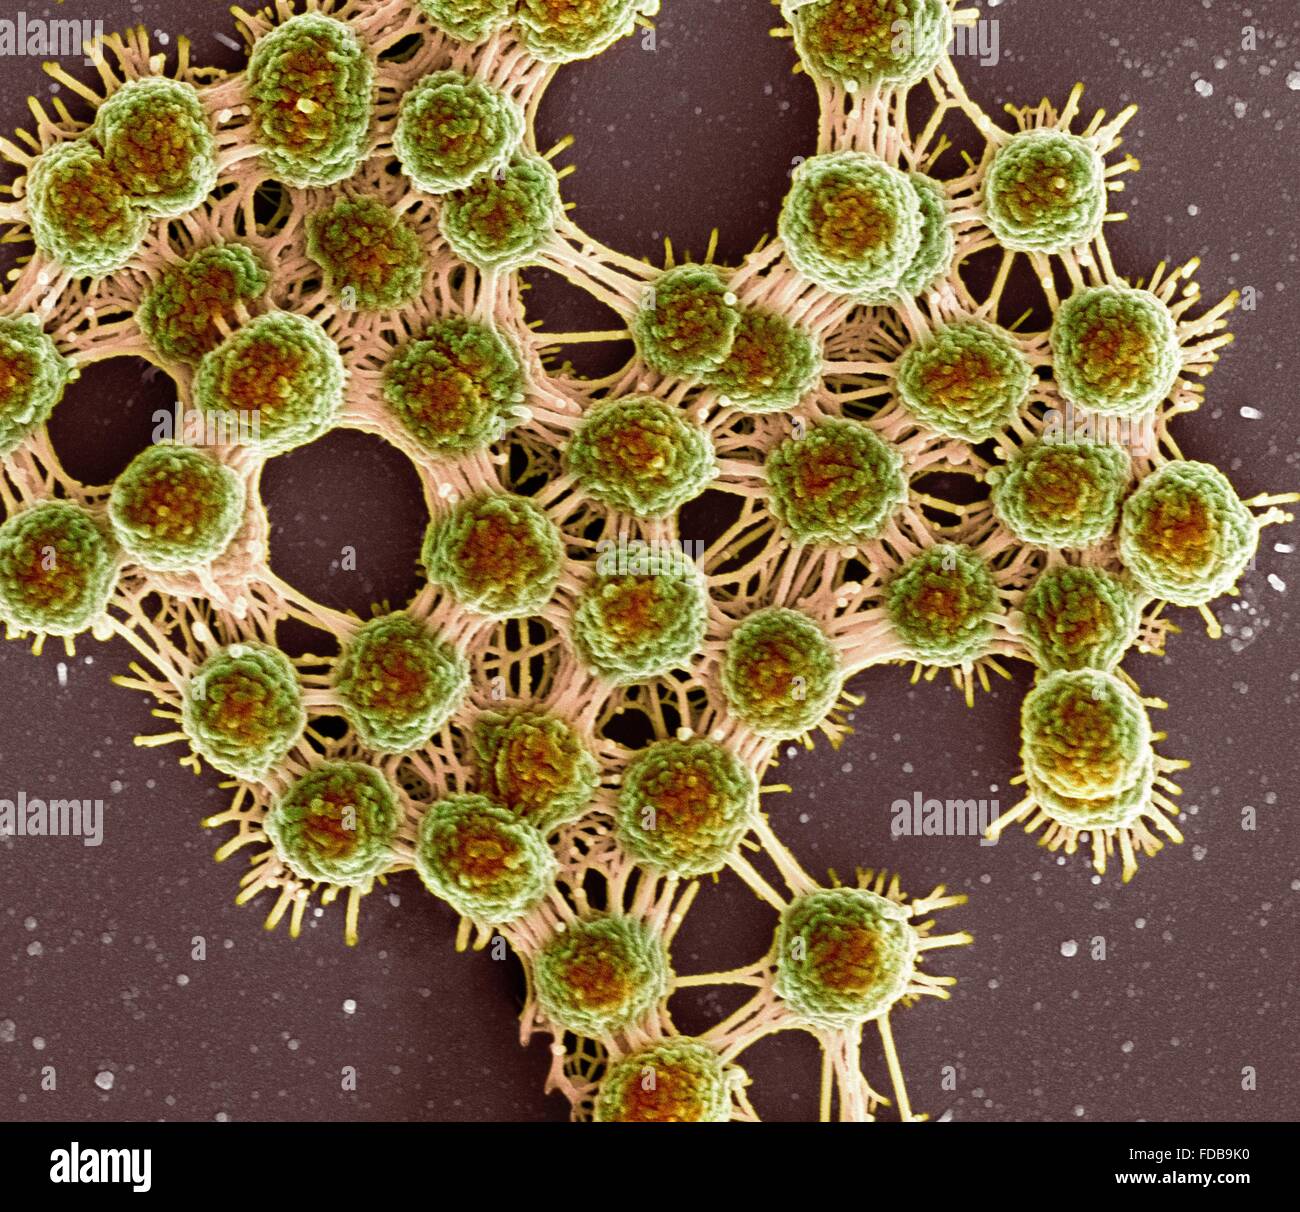 Saliva and bacteria. Coloured scanning electron micrograph (SEM) of a bacterial biofilm from saliva. This cluster of round bacteria (cocci) are linked together by stands of eDNA (extracellular deoxyribonucleic acid). The eDNA helps the biofilm to adhere to oral surfaces and contributes to antimicrobial resistance. Stock Photo